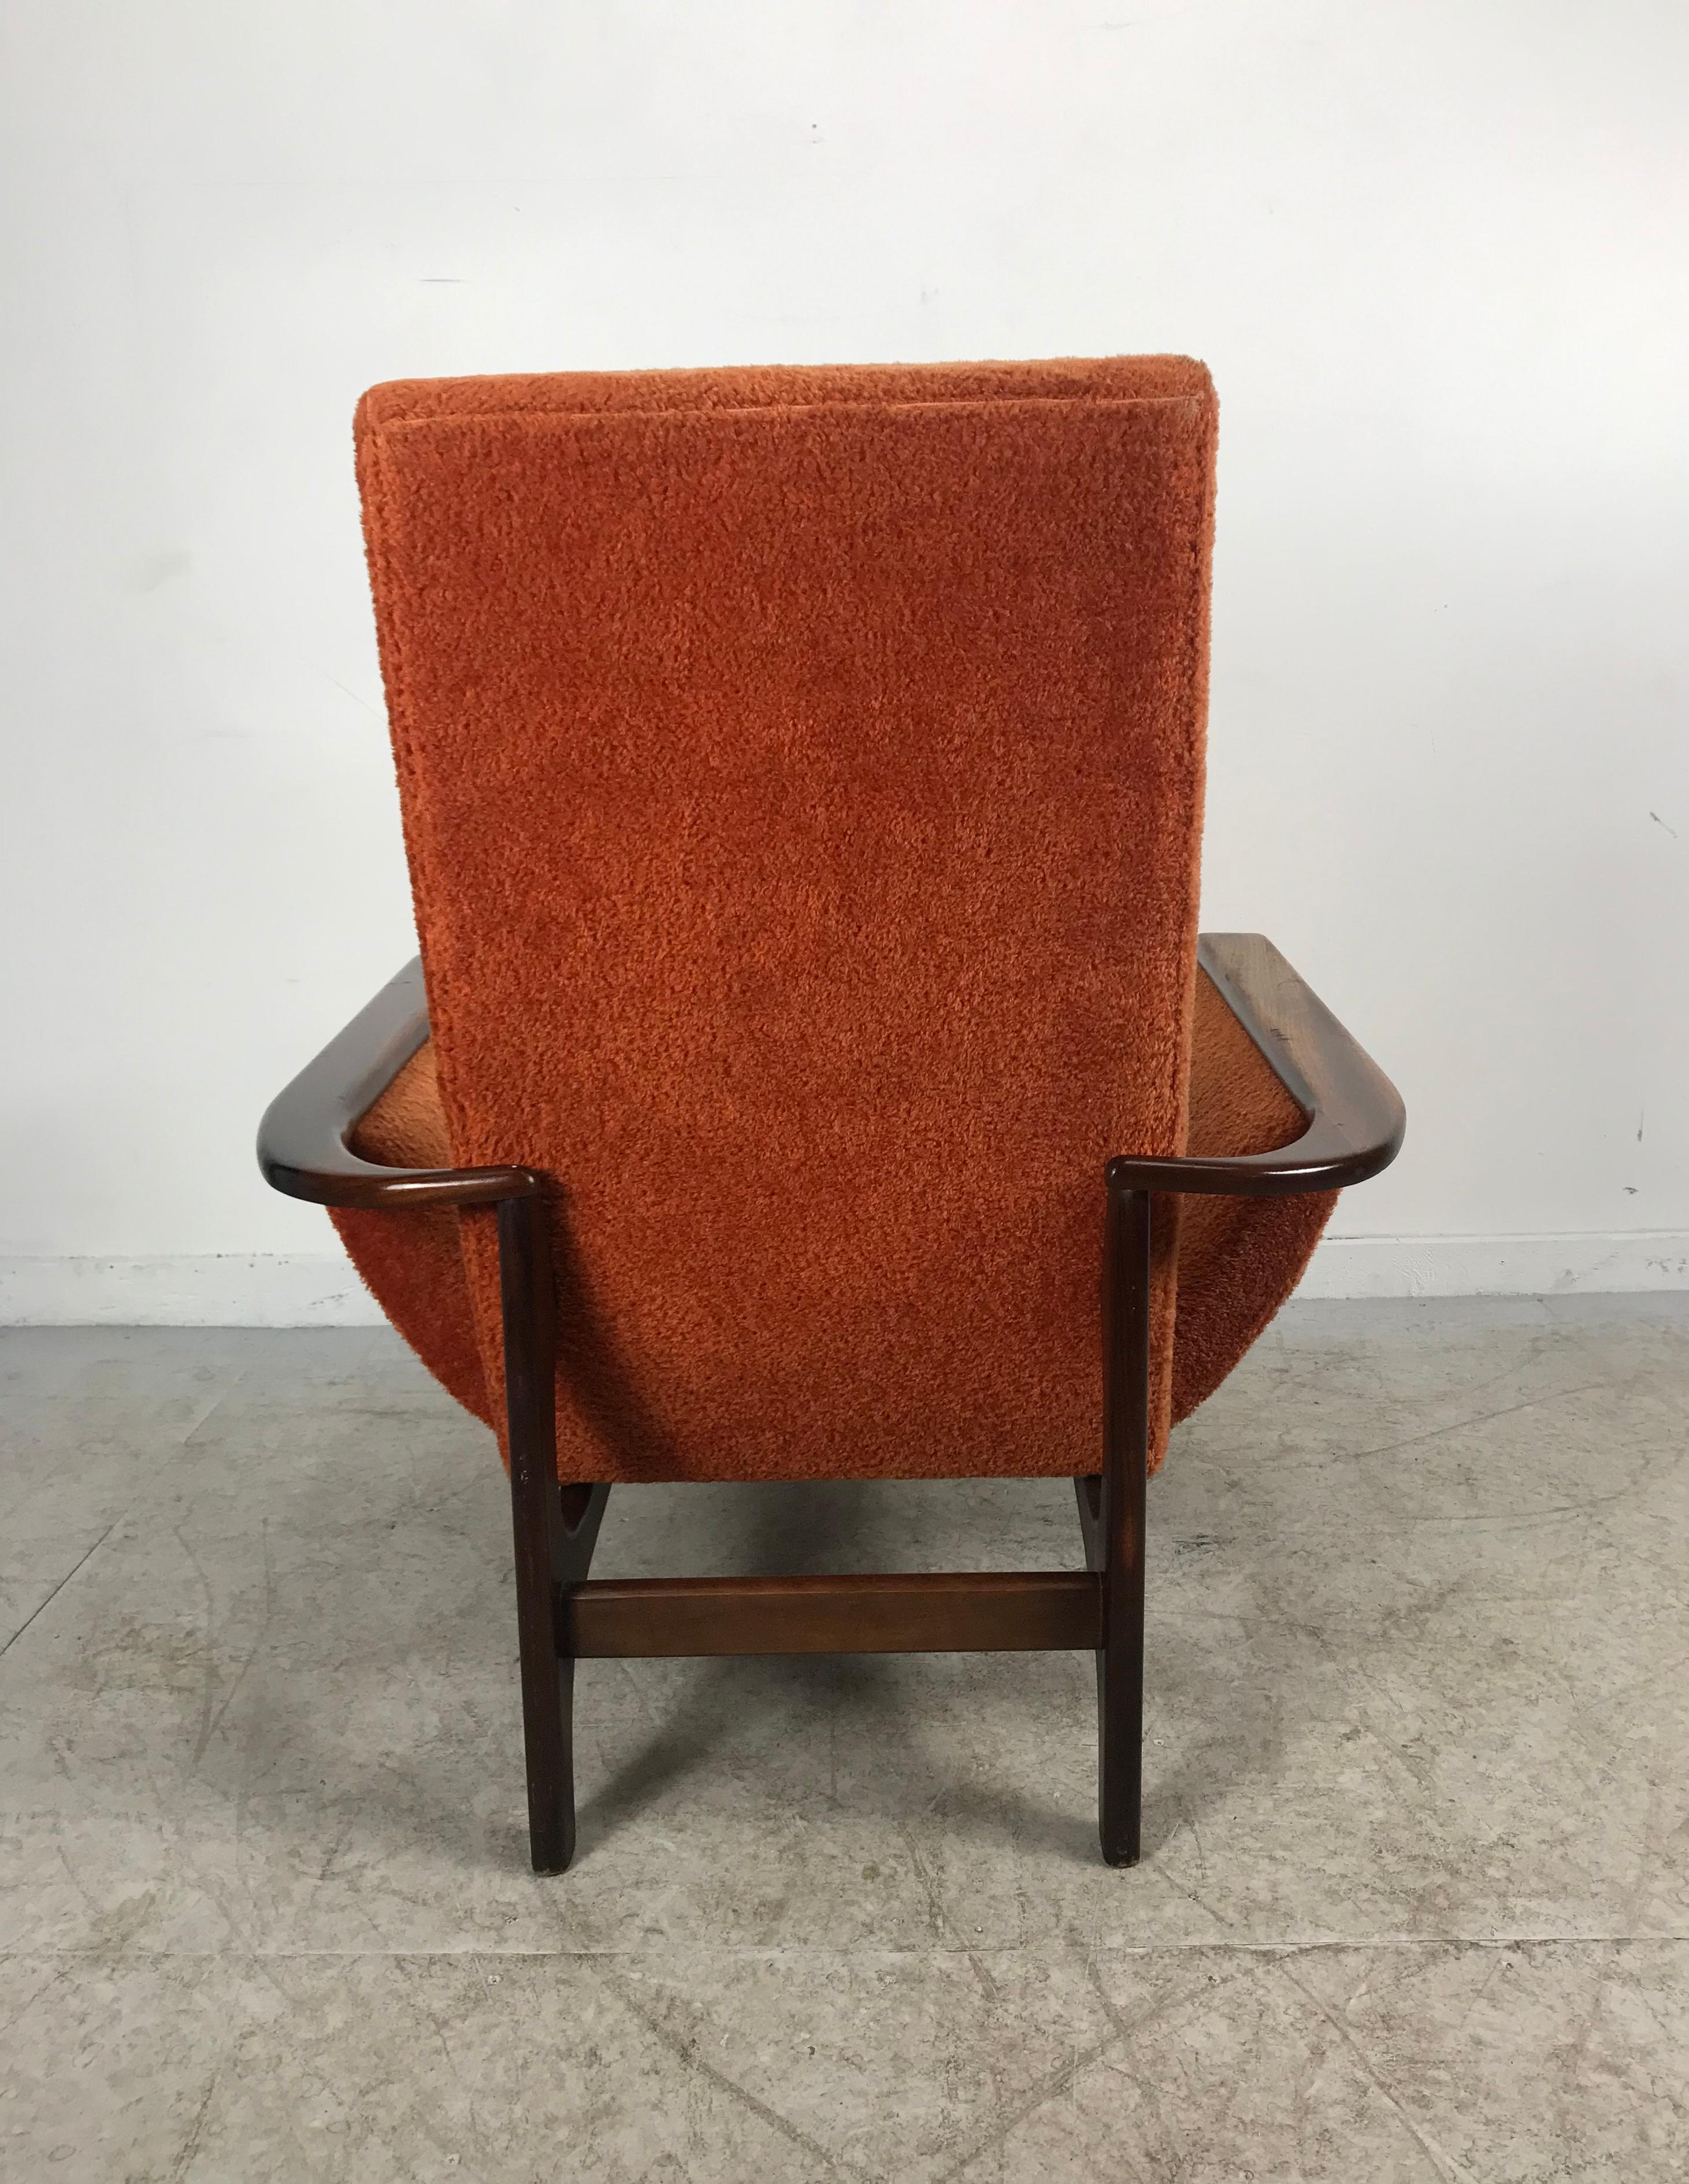 Sculptural Mid-Century Modern Lounge chair designed by Luigi Tiengo for Cimon, Montreal. Amazing, stylish design from any angle, sculptural walnut wraparound walnut, reminiscent of the Classic design styling’s of Adrian Pearsall. Retains original